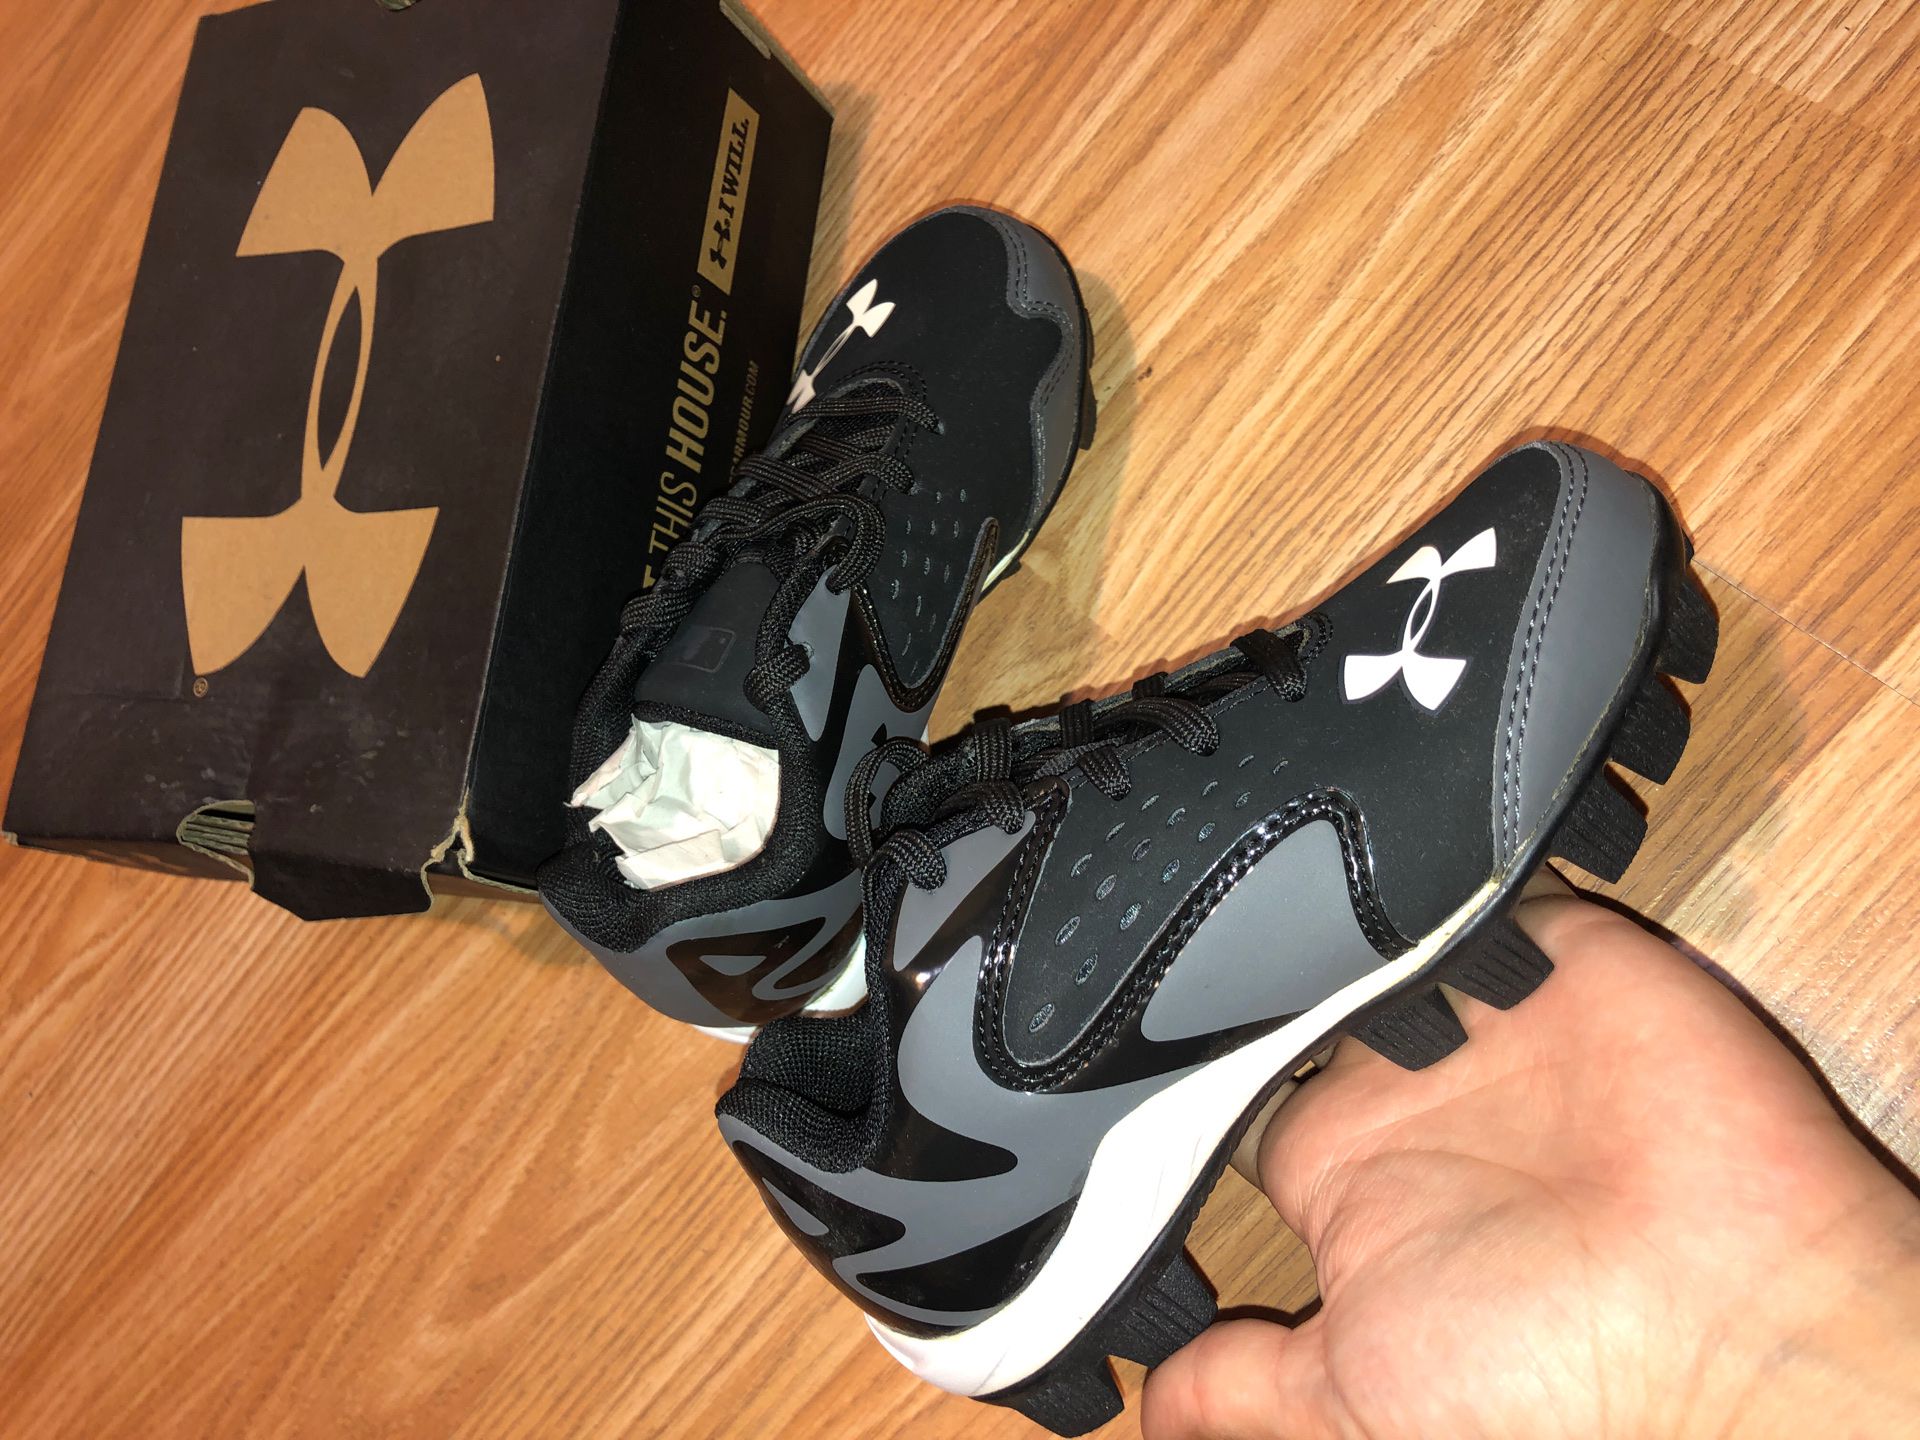 Under Armour baseball cleats YOUTH